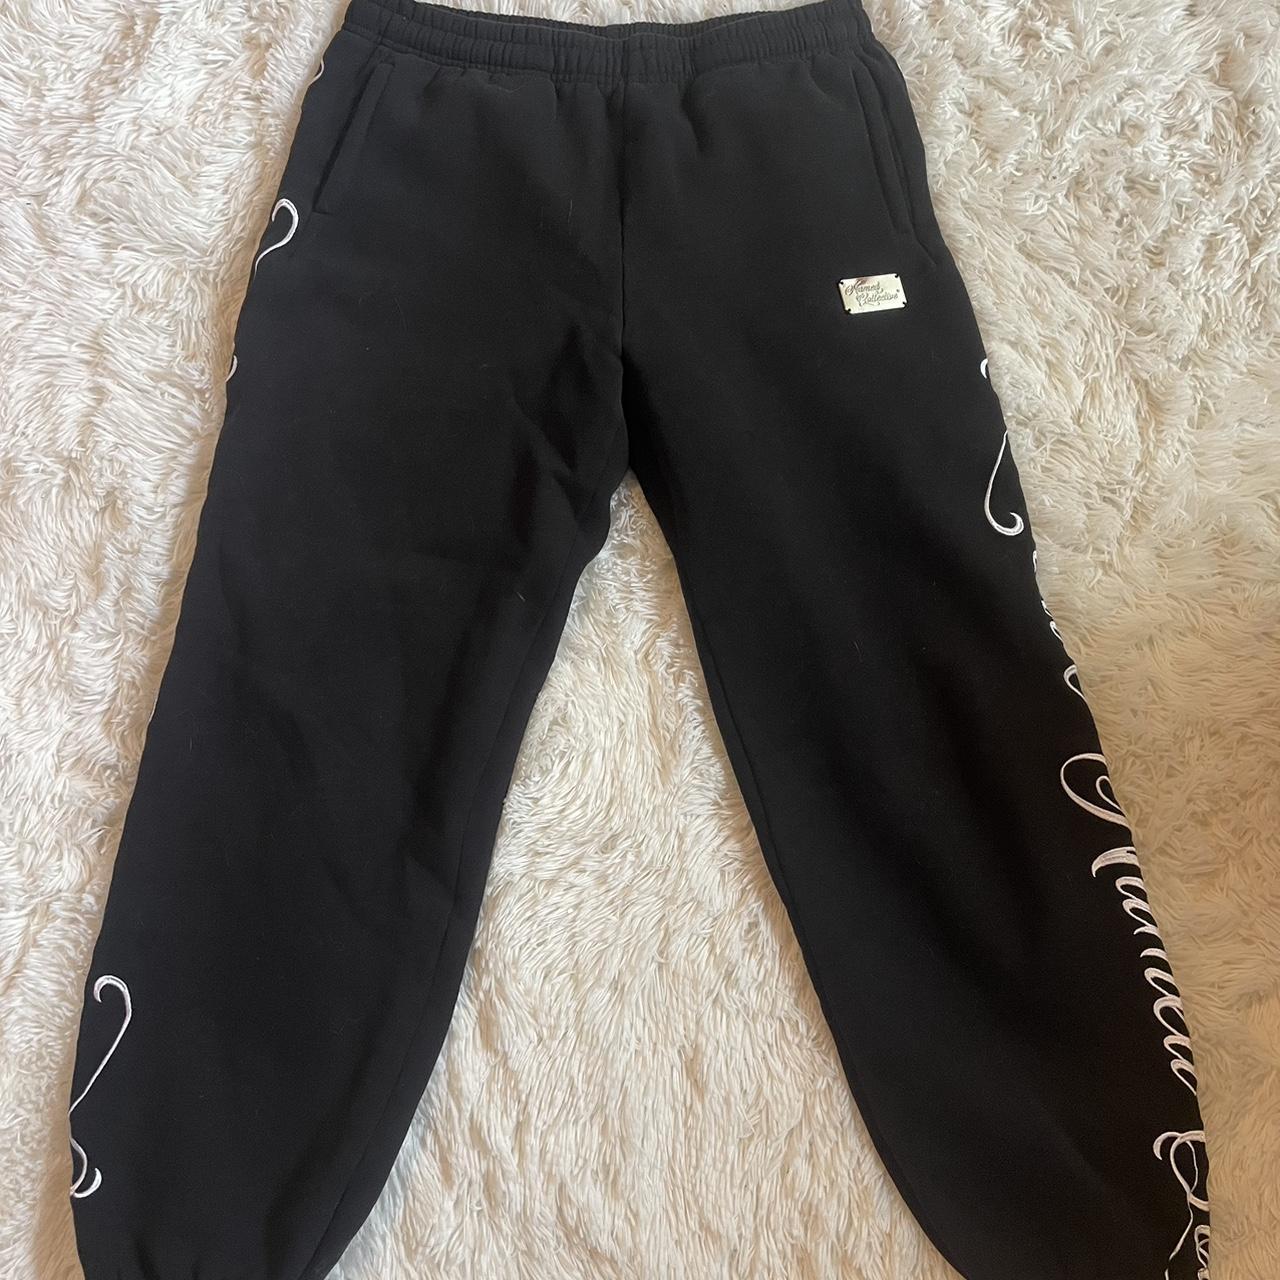 Named Collective ‘Immortal’ Sweatpants Size Large... - Depop